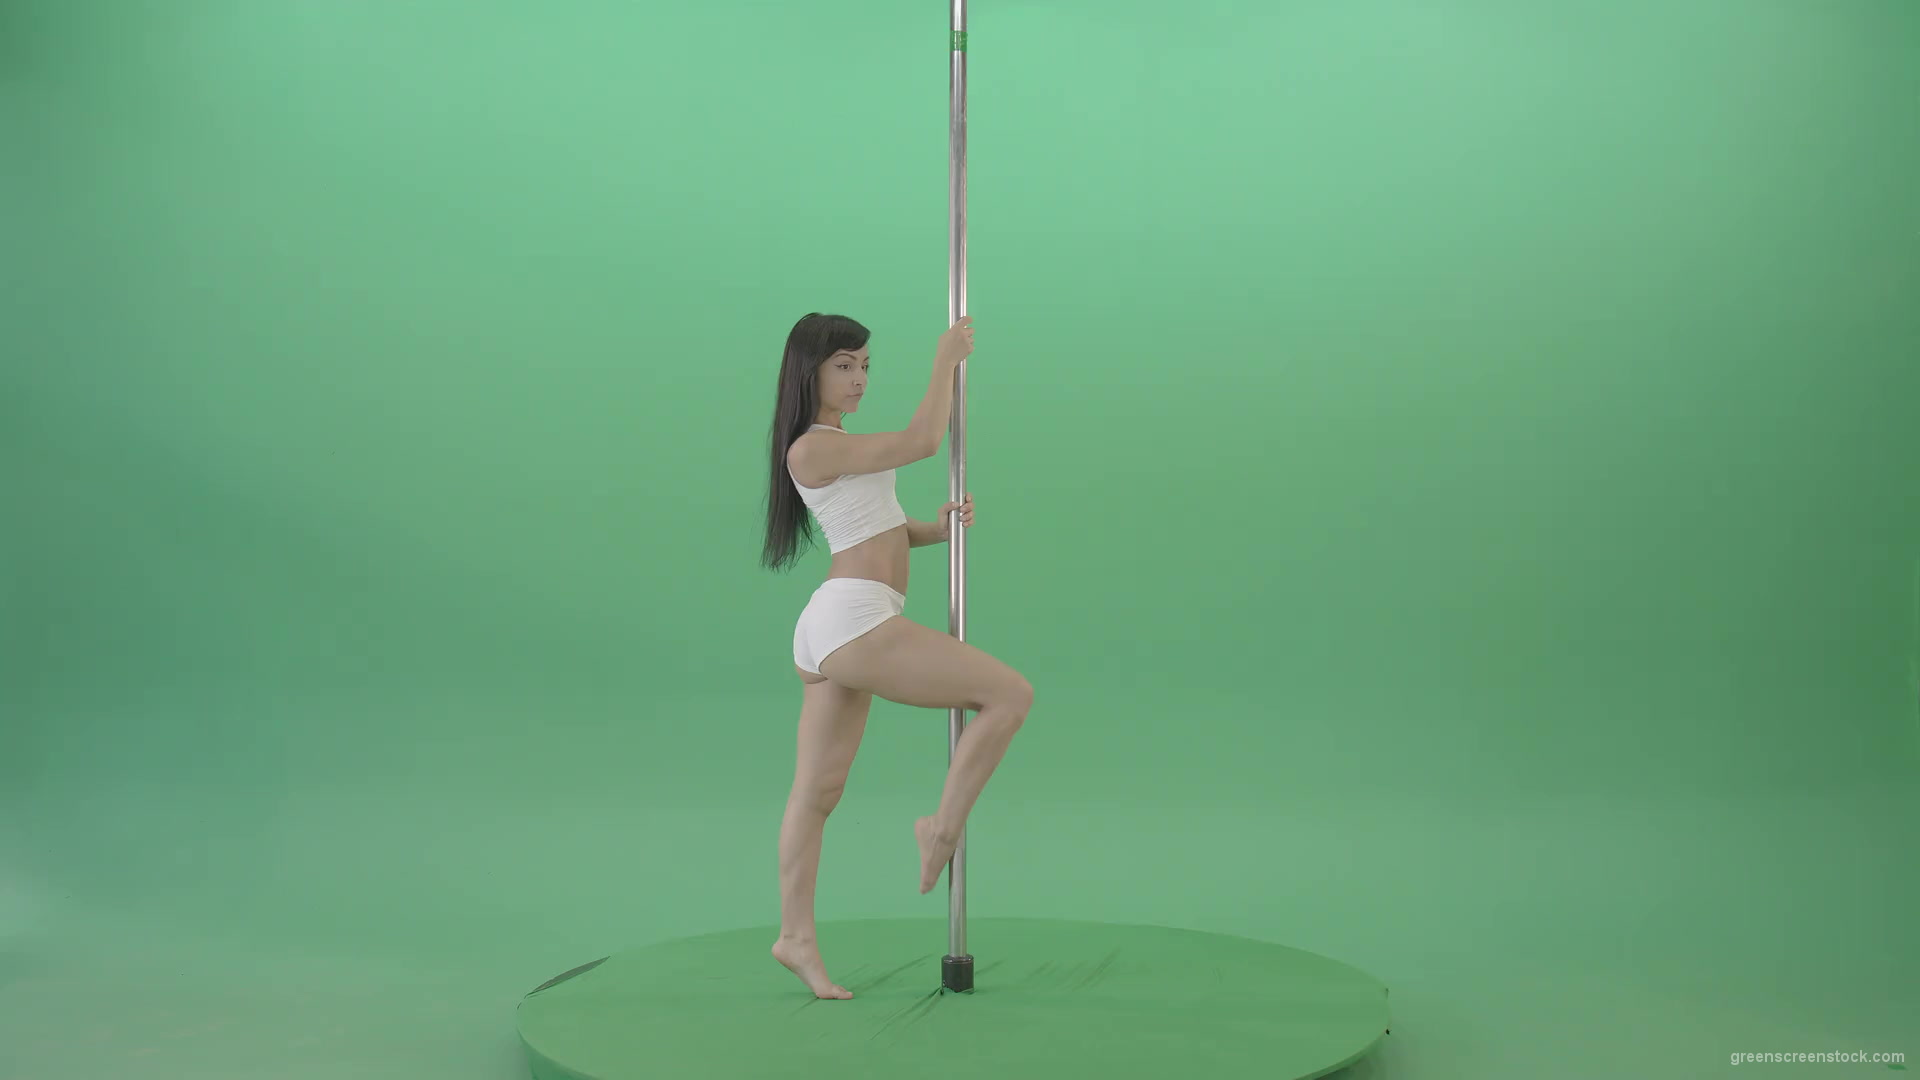 Sport-Fit-Girl-spinning-on-pole-making-acrobatic-element-on-green-screen-1920_001 Green Screen Stock